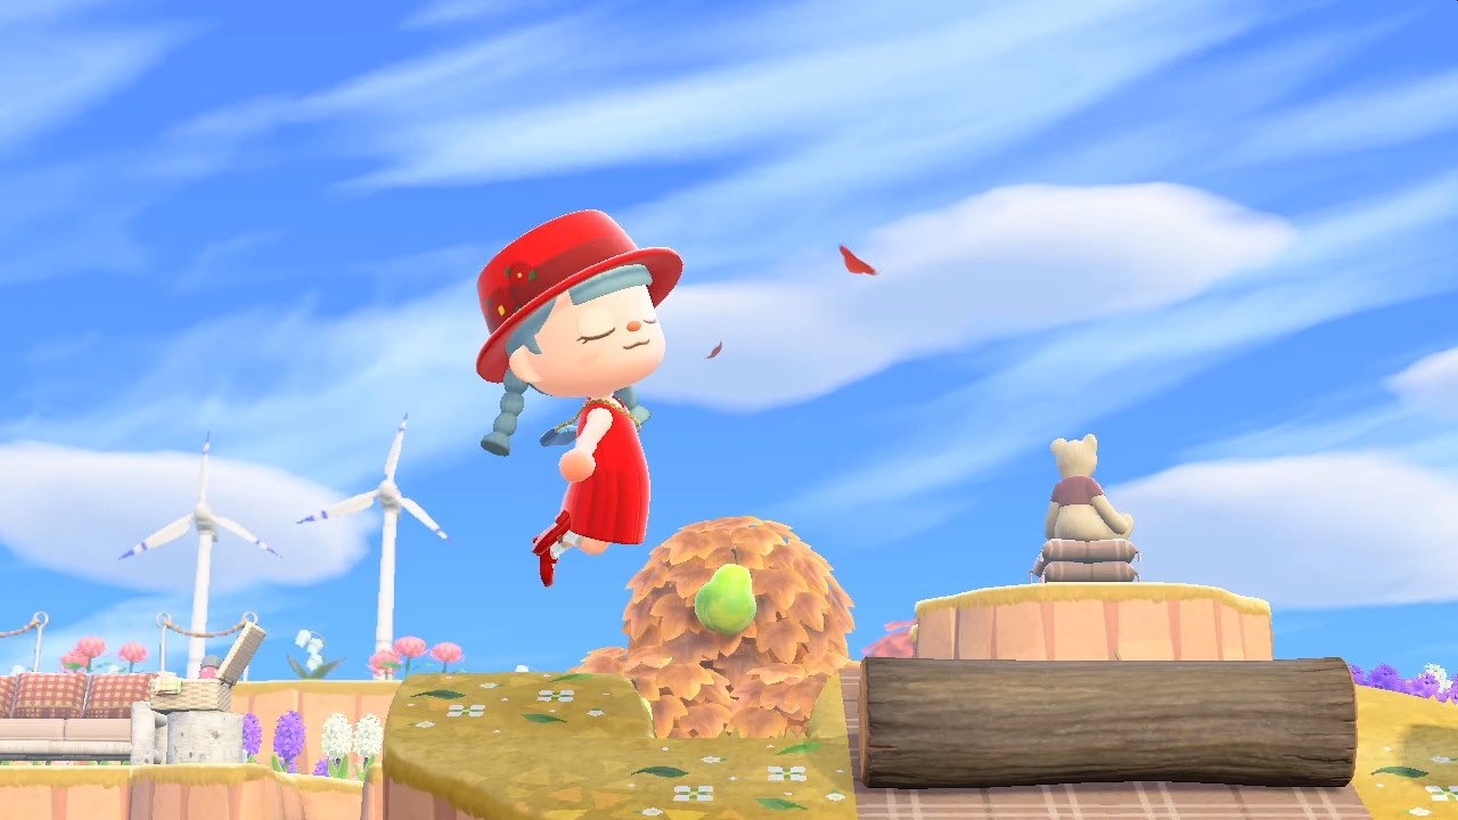 Shiseido Releases Short “Camellia” Movie Created With Animal Crossing: New Horizons Players